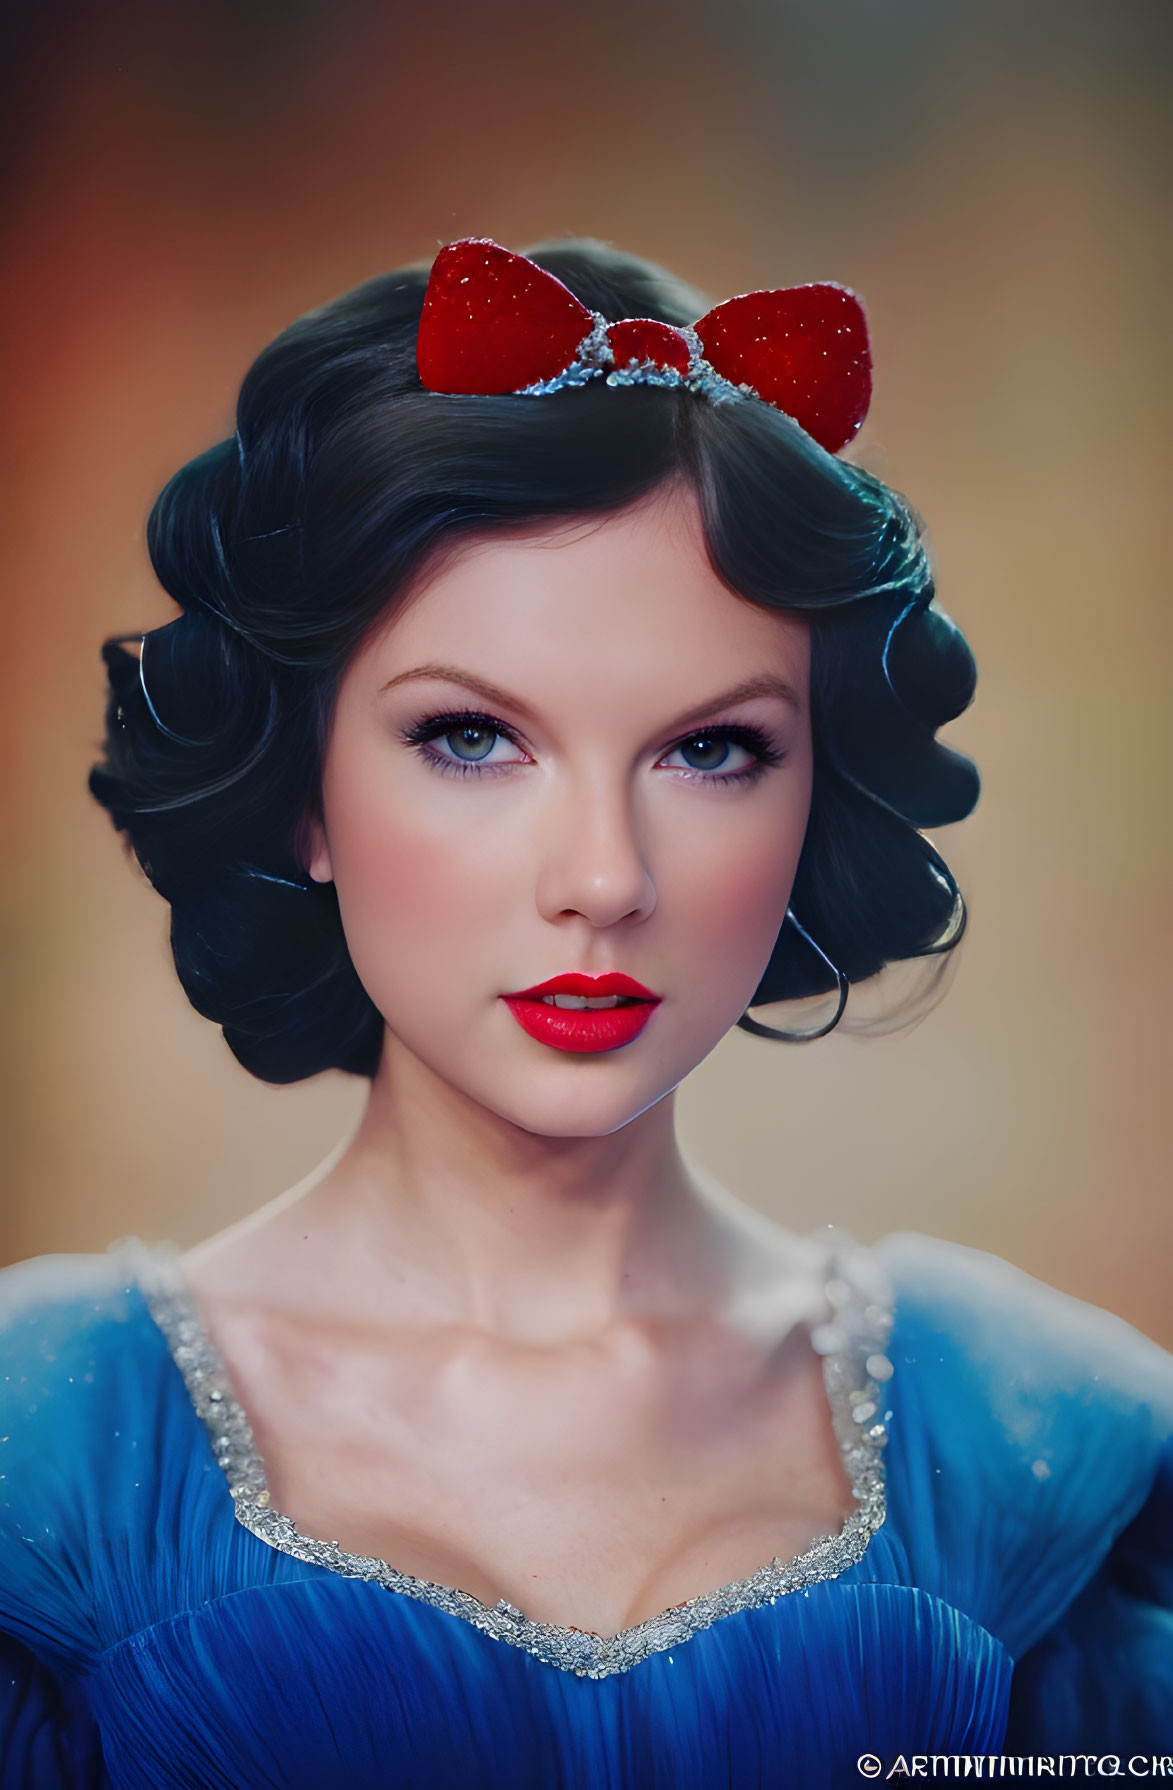 ANDRE´S ART TAYLOR SWIFT AS PRINCESS SNOW WHITE